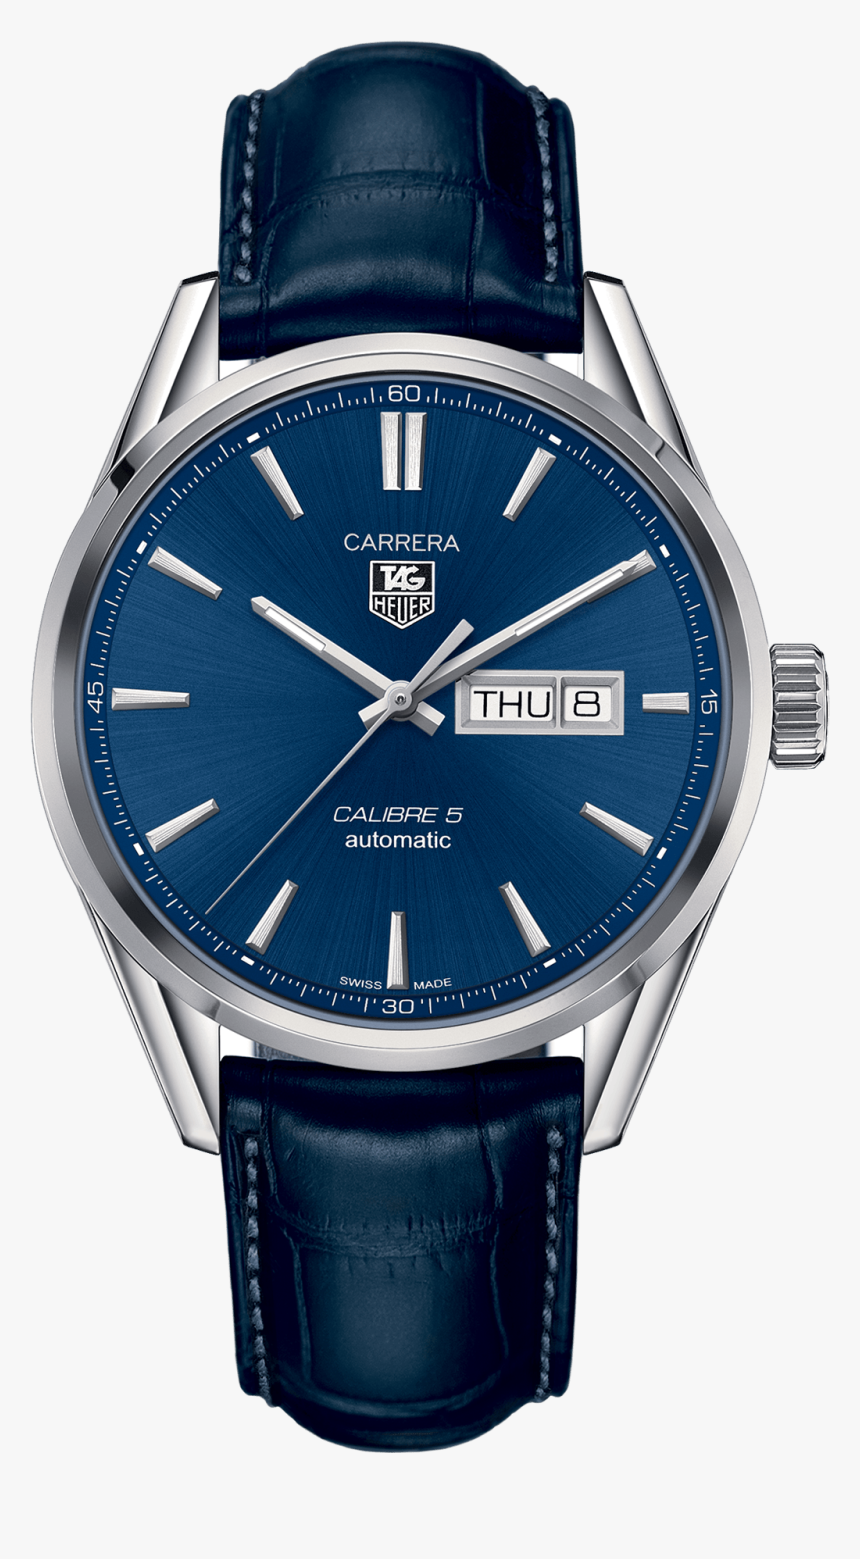 Tag Heuer Carrera Calibre 5 Day-date 41mm Leather Strap - Tag Heuer Carrera Calibre 5 Blue, HD Png Download, Free Download